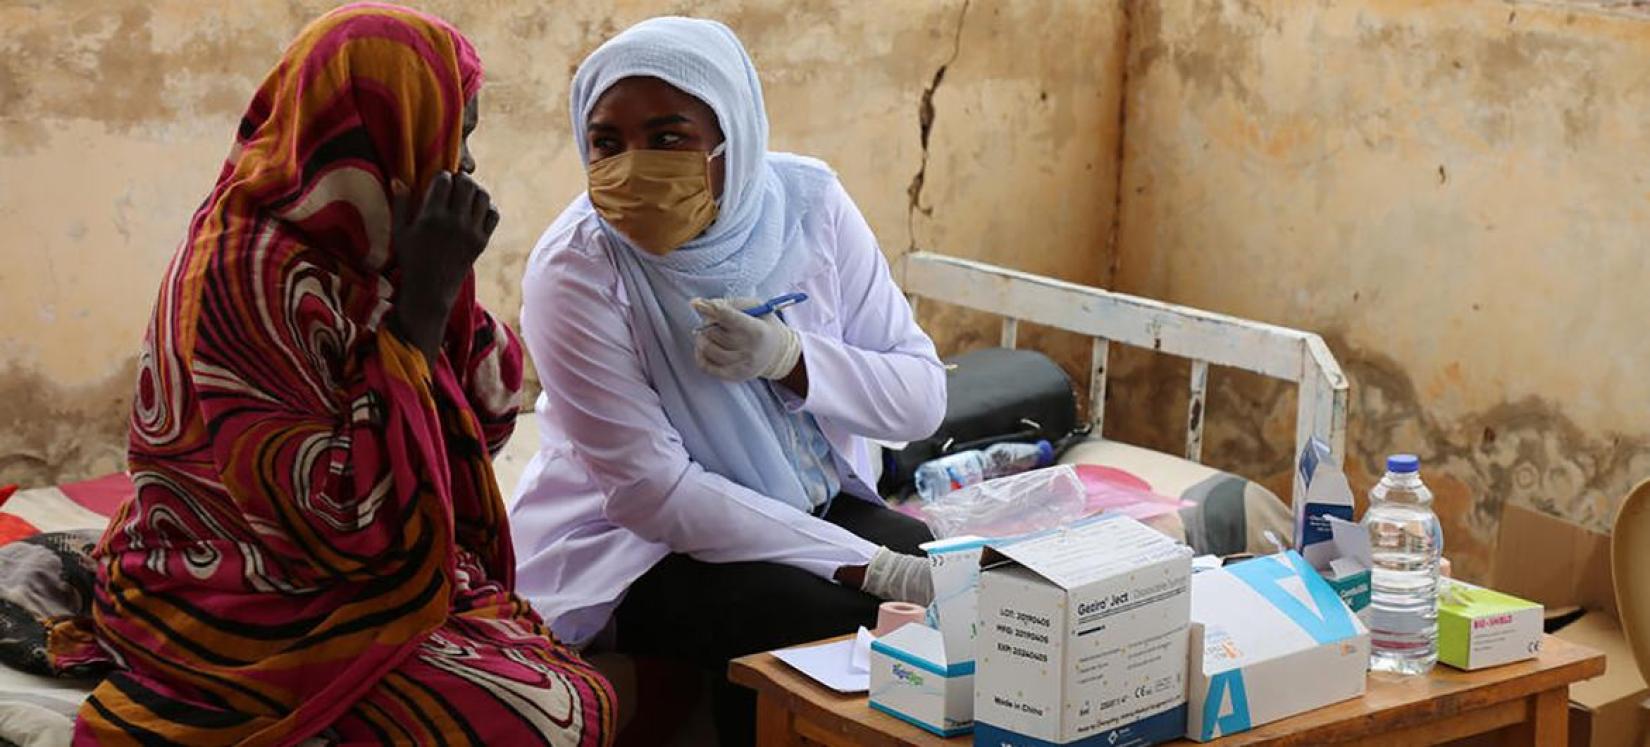 Two midwives work at a UNFPA-supported clinic in Sudan. 